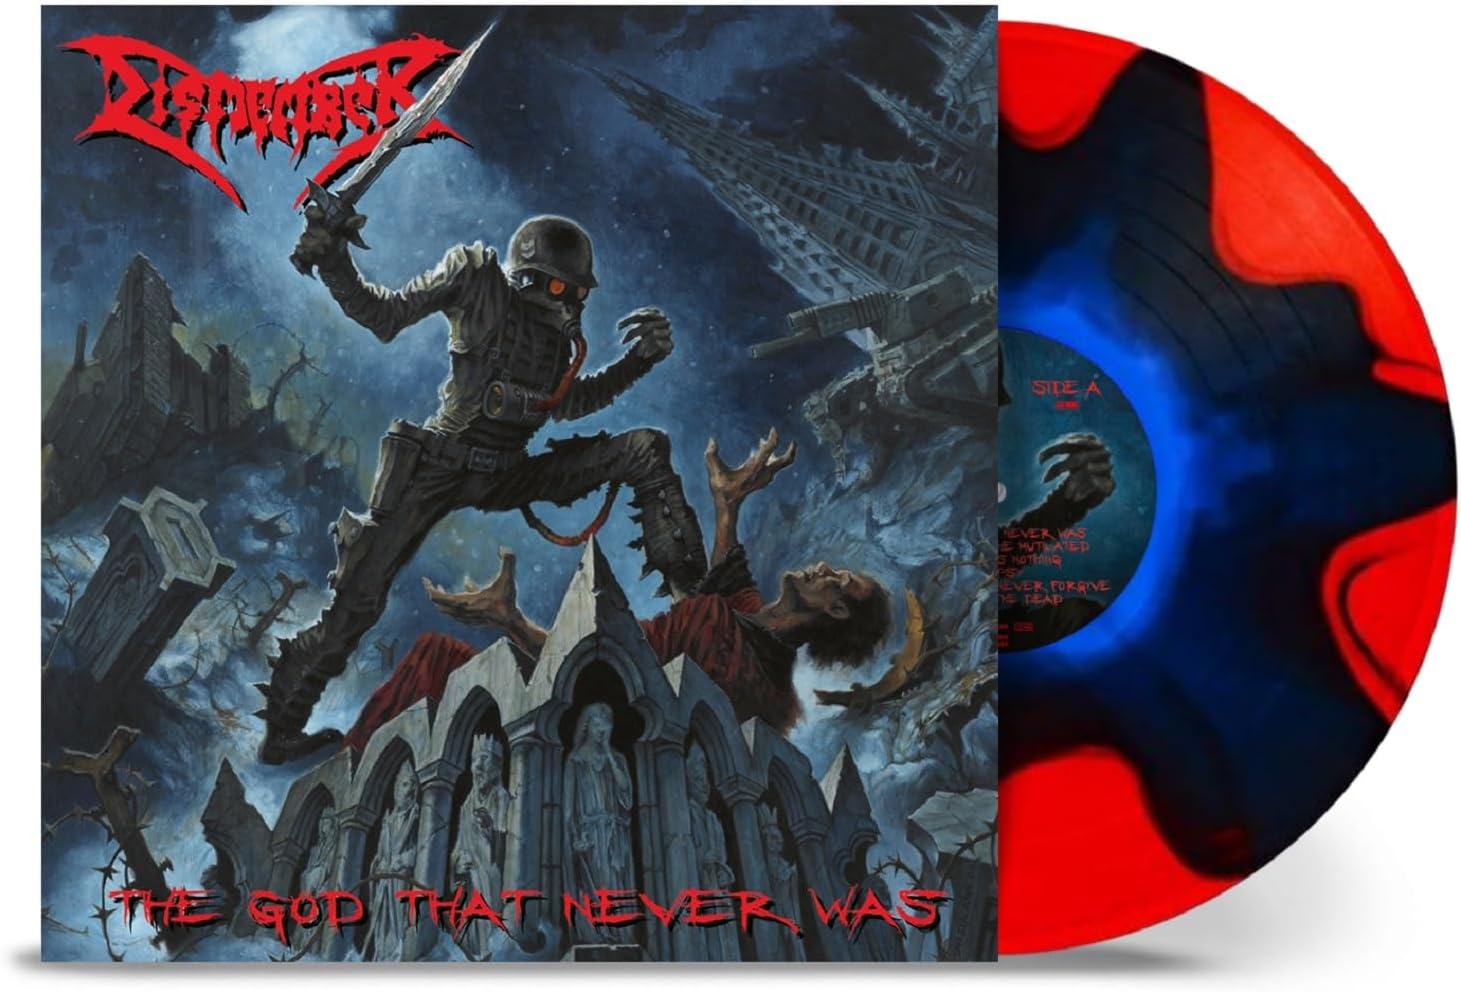 Dismember "The God That Never Was" Red / Black / Blue Vinyl